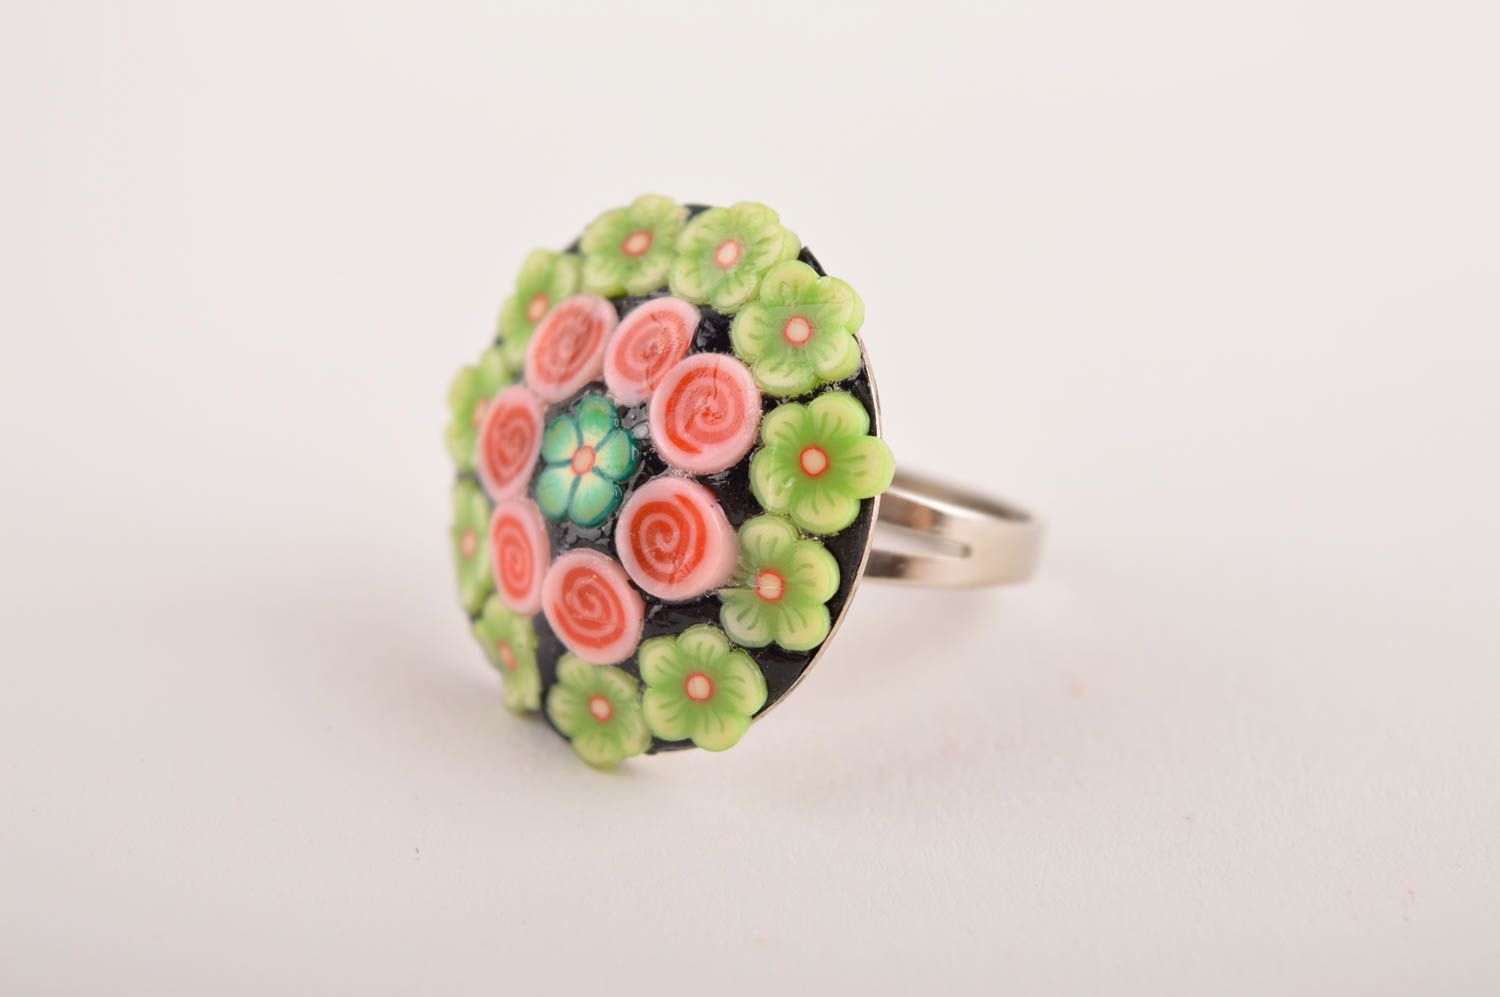 Handmade clay ring designer clay accessory unusual gift for women clay jewelry photo 2